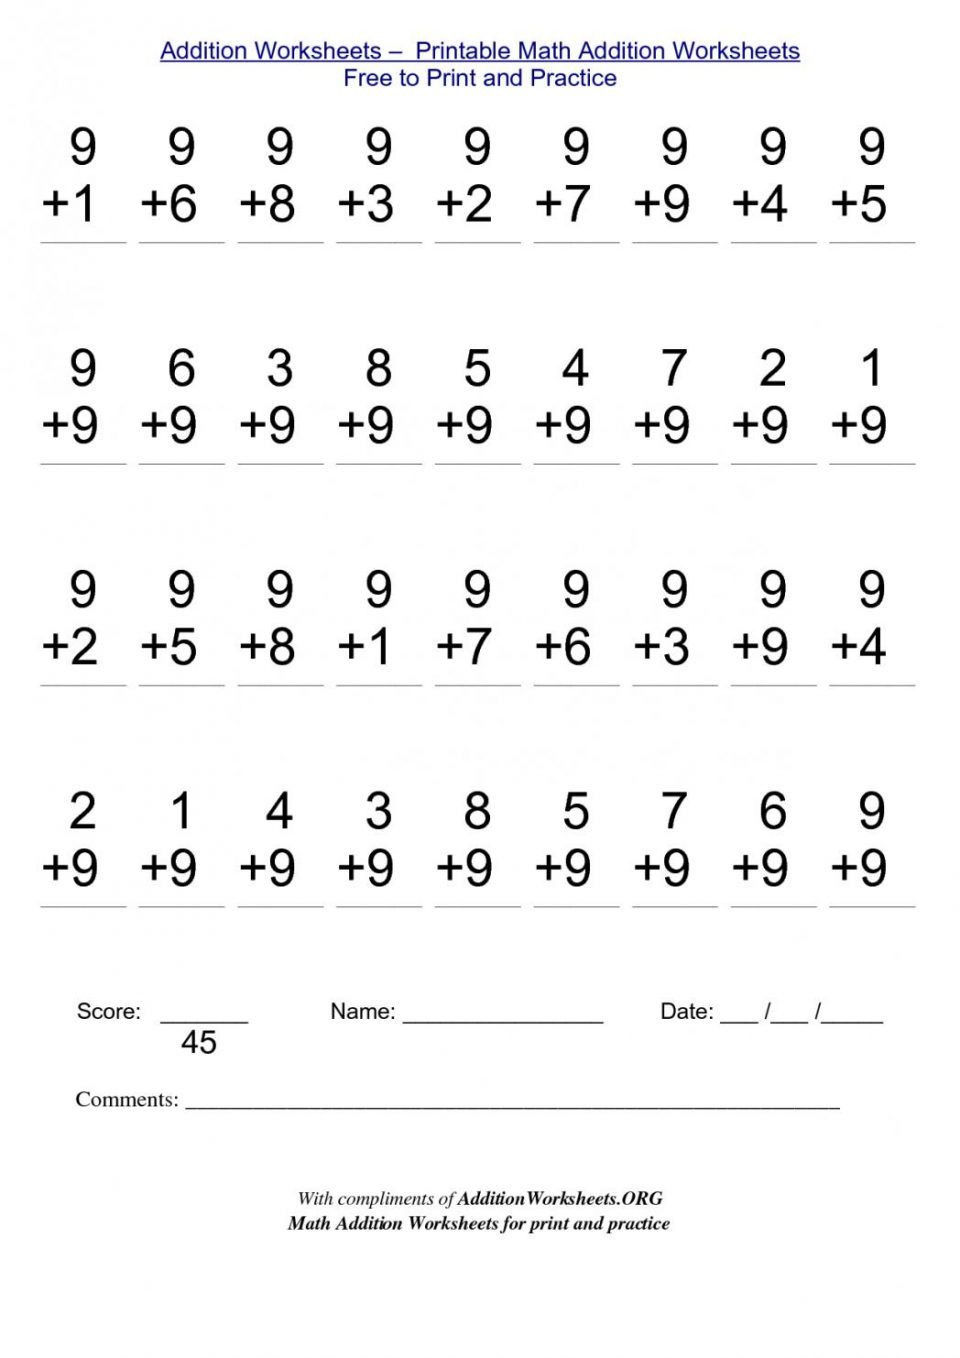 touch-math-printables-touch-math-magic-basic-addition-with-touch-points-by